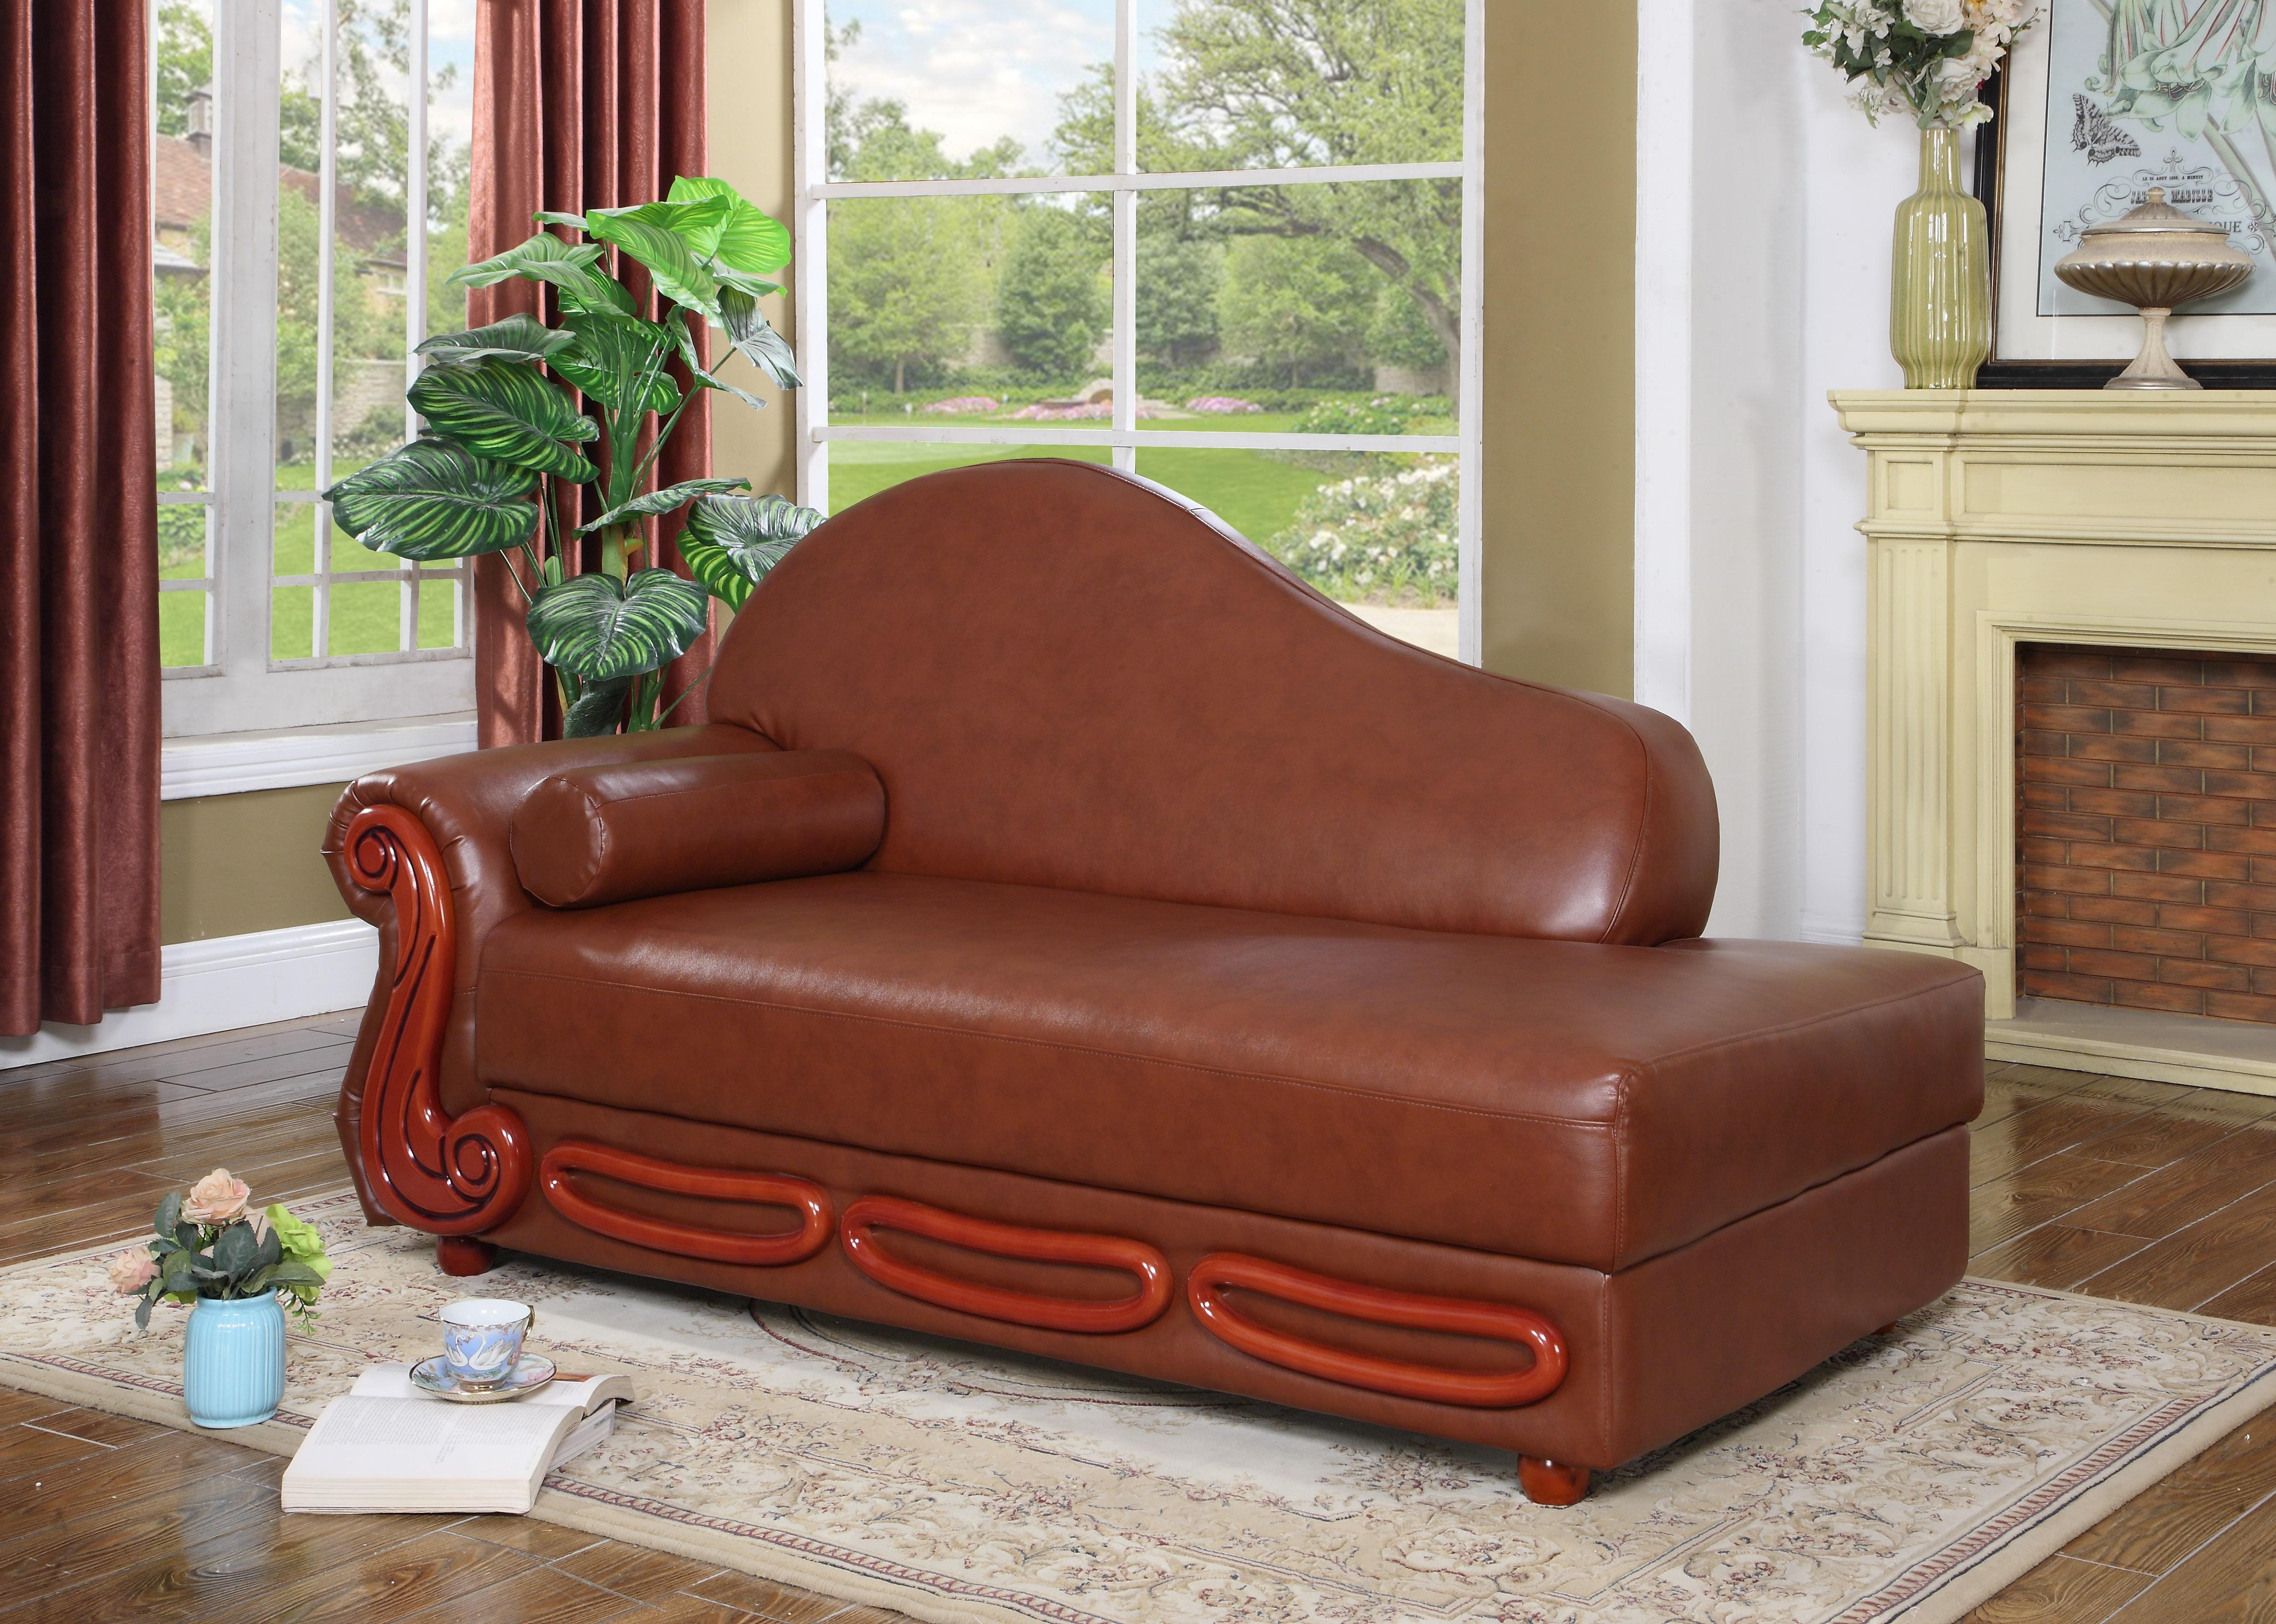 

    
Meridian 632 Bella Brown Bonded Leather Living Room Chaise Traditional Classic
